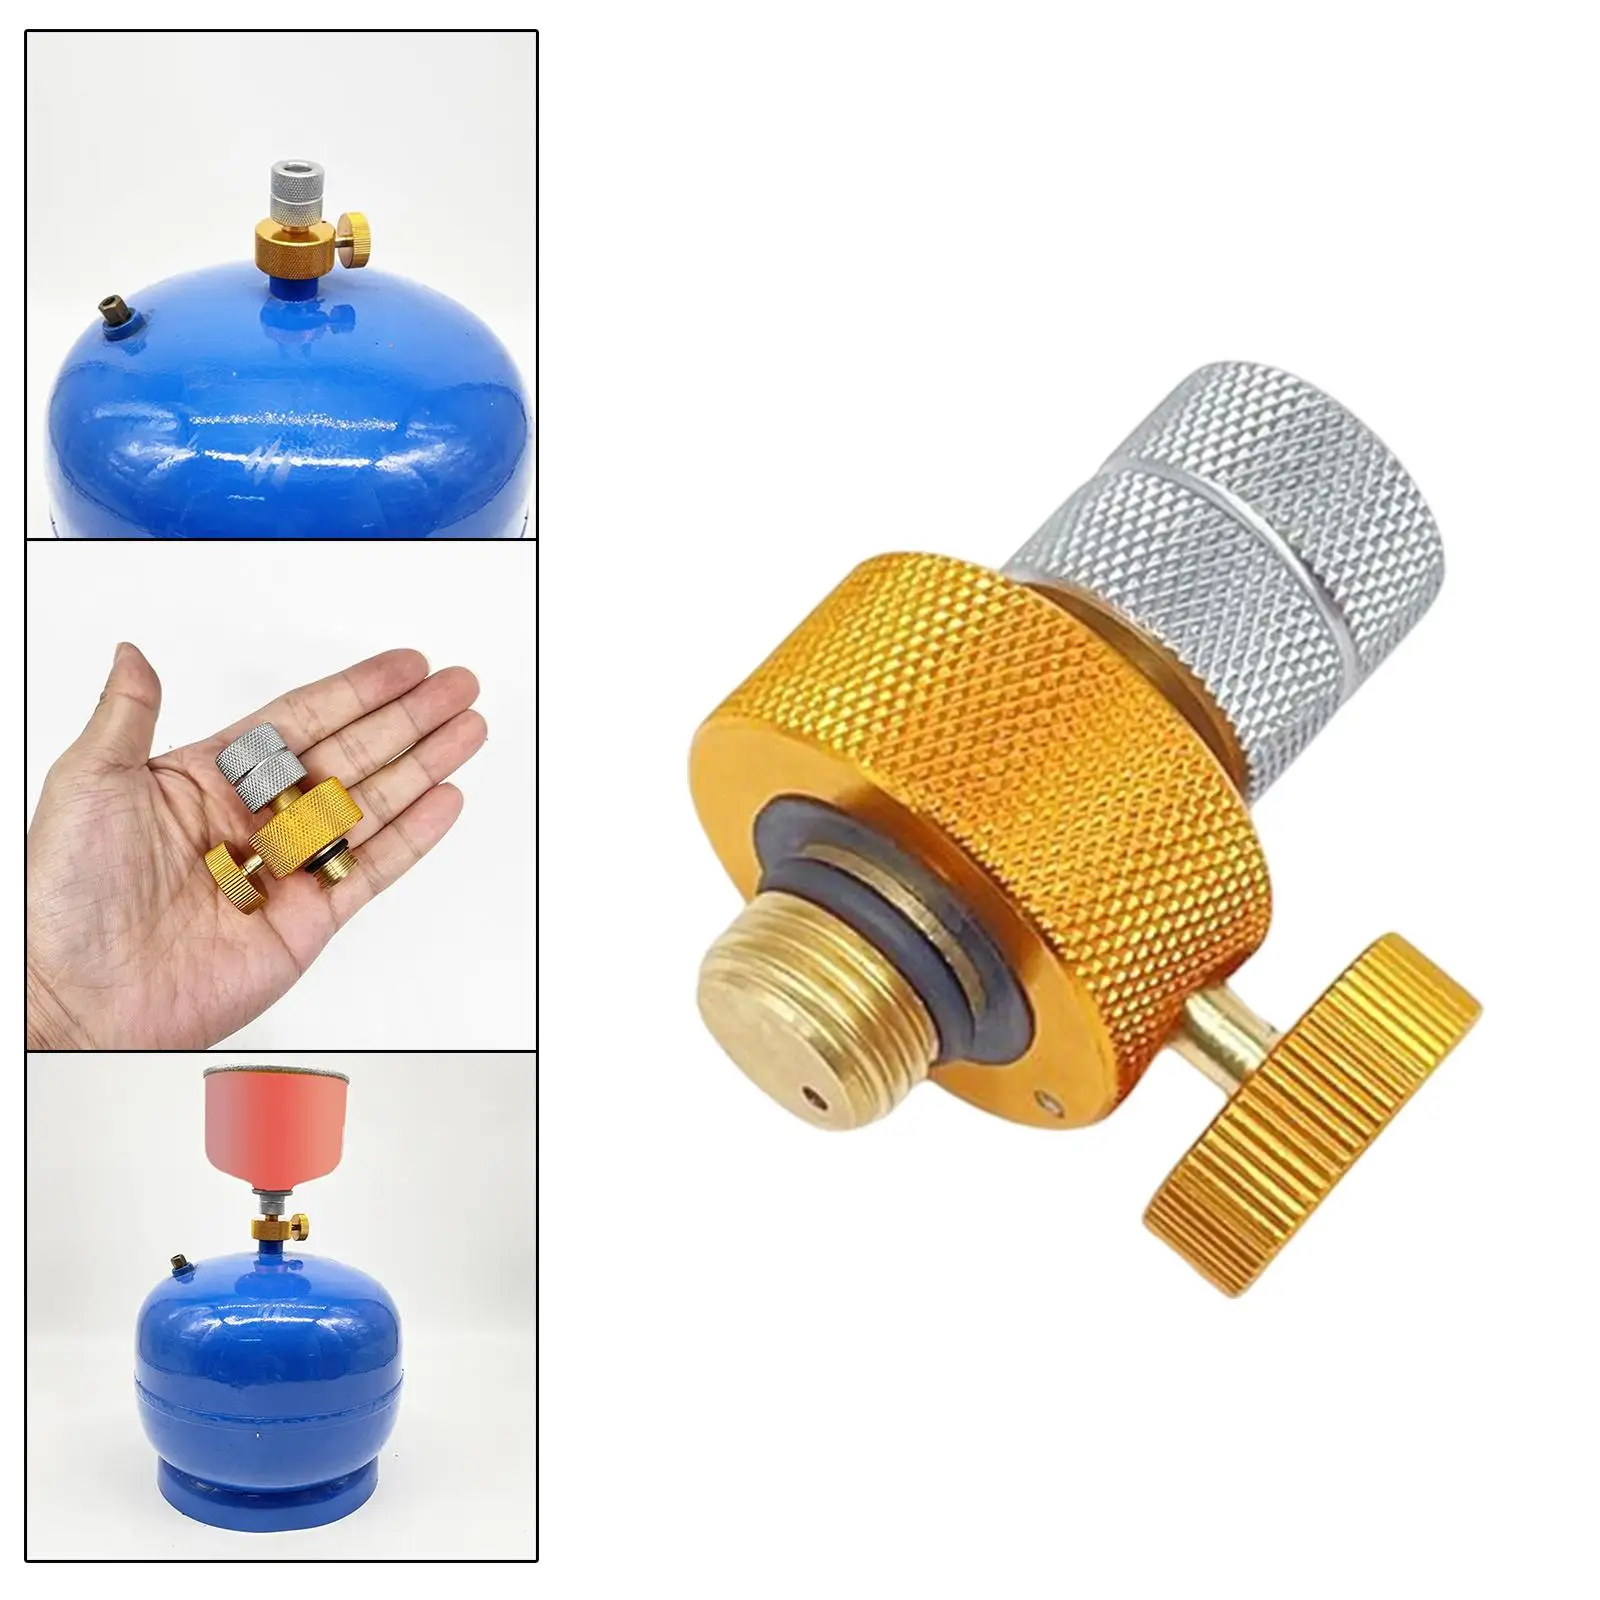 Outdoor Gas Tank Adapter Furnace Connector Gas Filling Adapter Cylinder Split Type for Camping Fuel Tank Filling BBQ Hiking